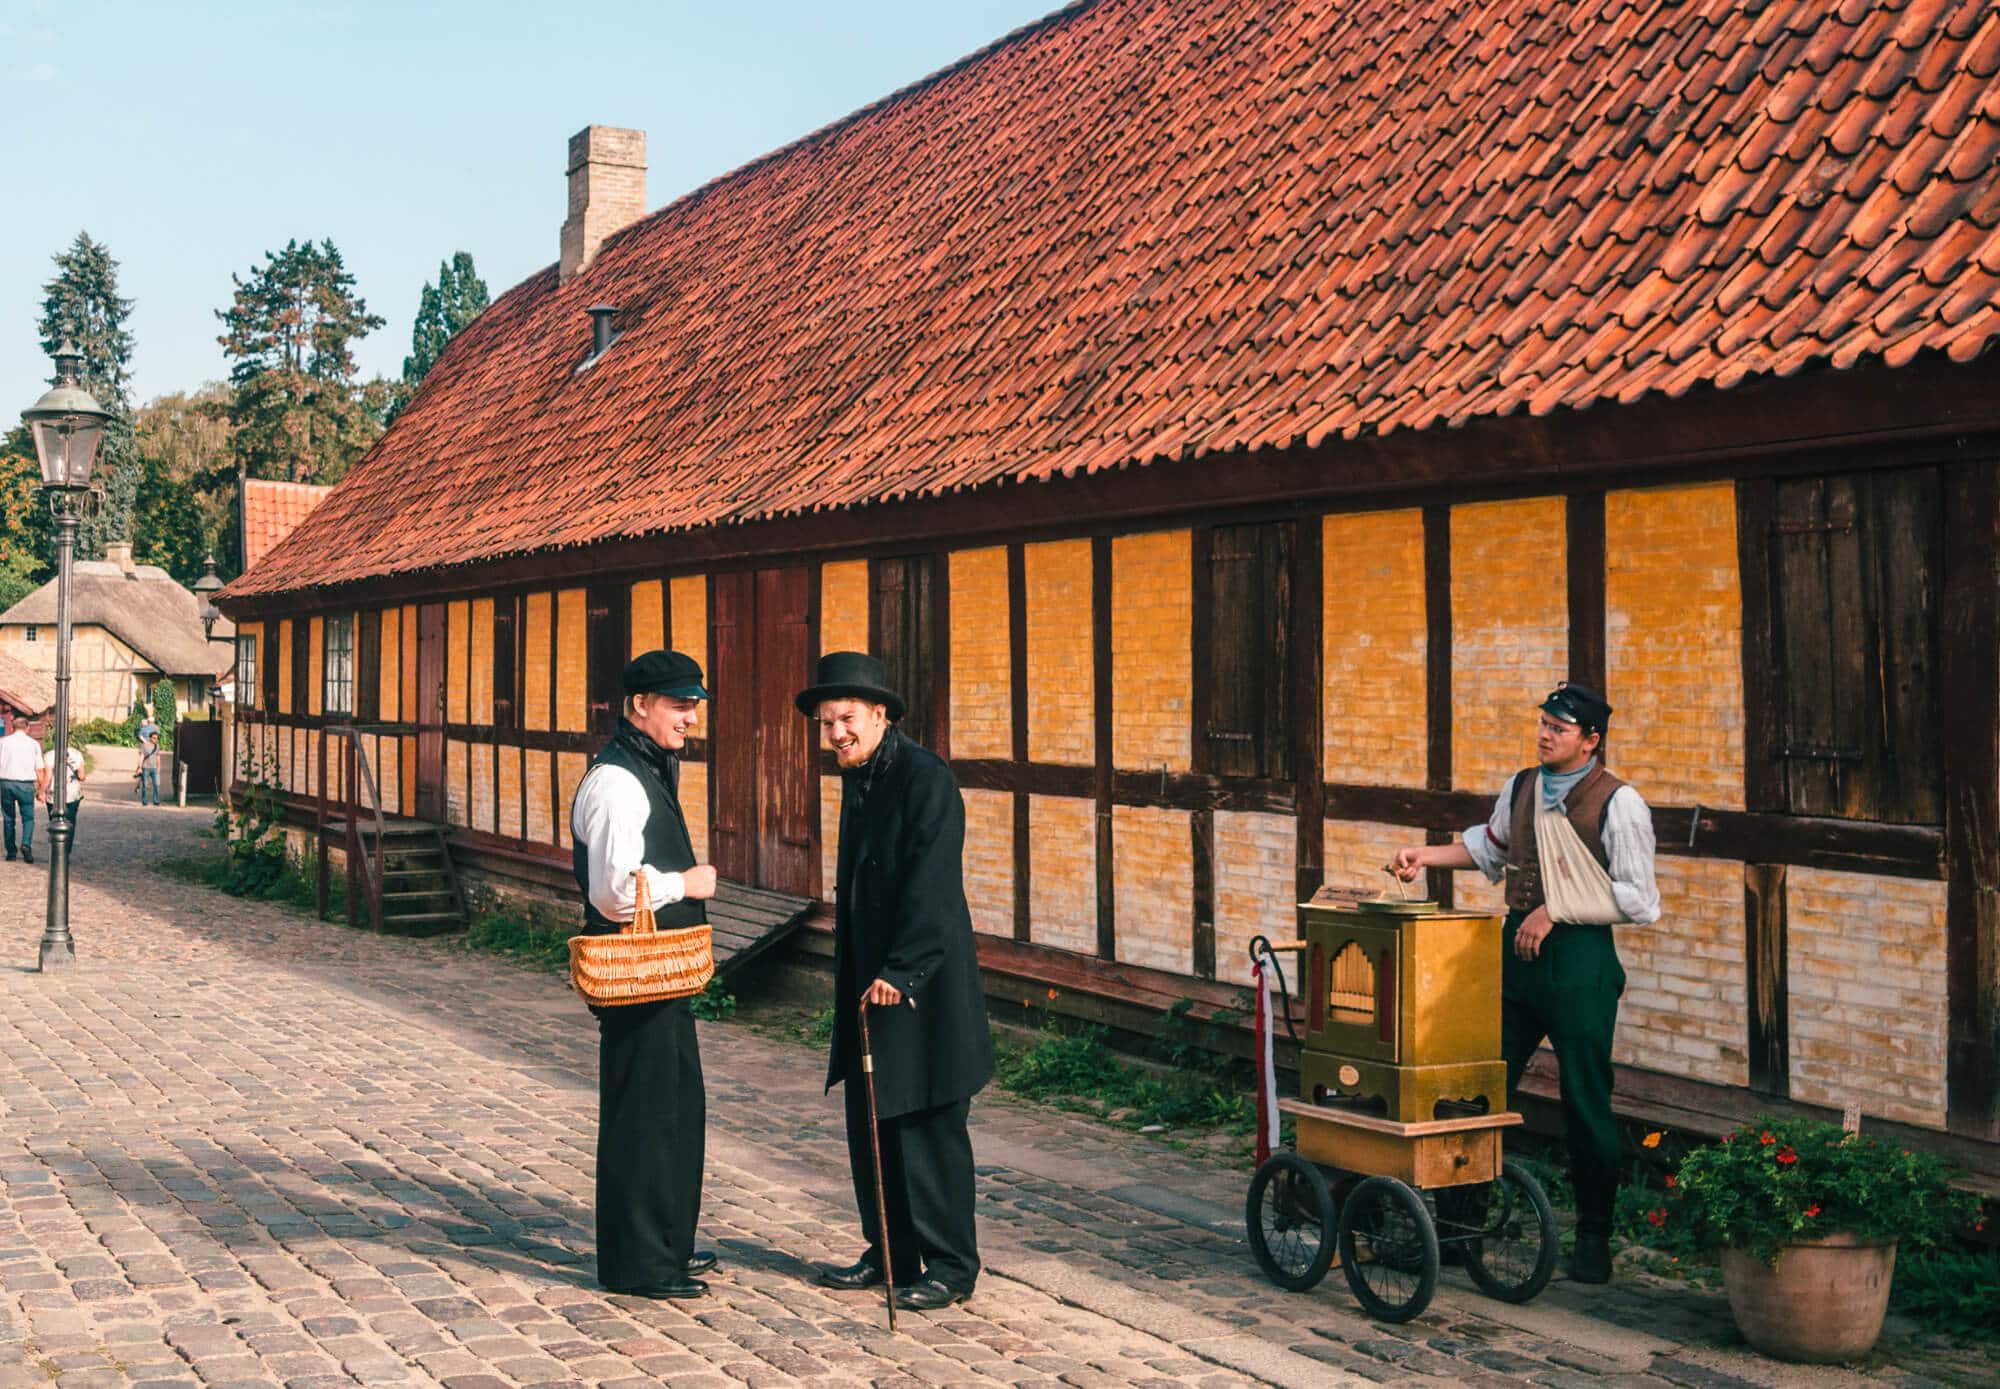 Two days in Aarhus - Denmark's happiest city. Den Gamle By - The coolest museum ever